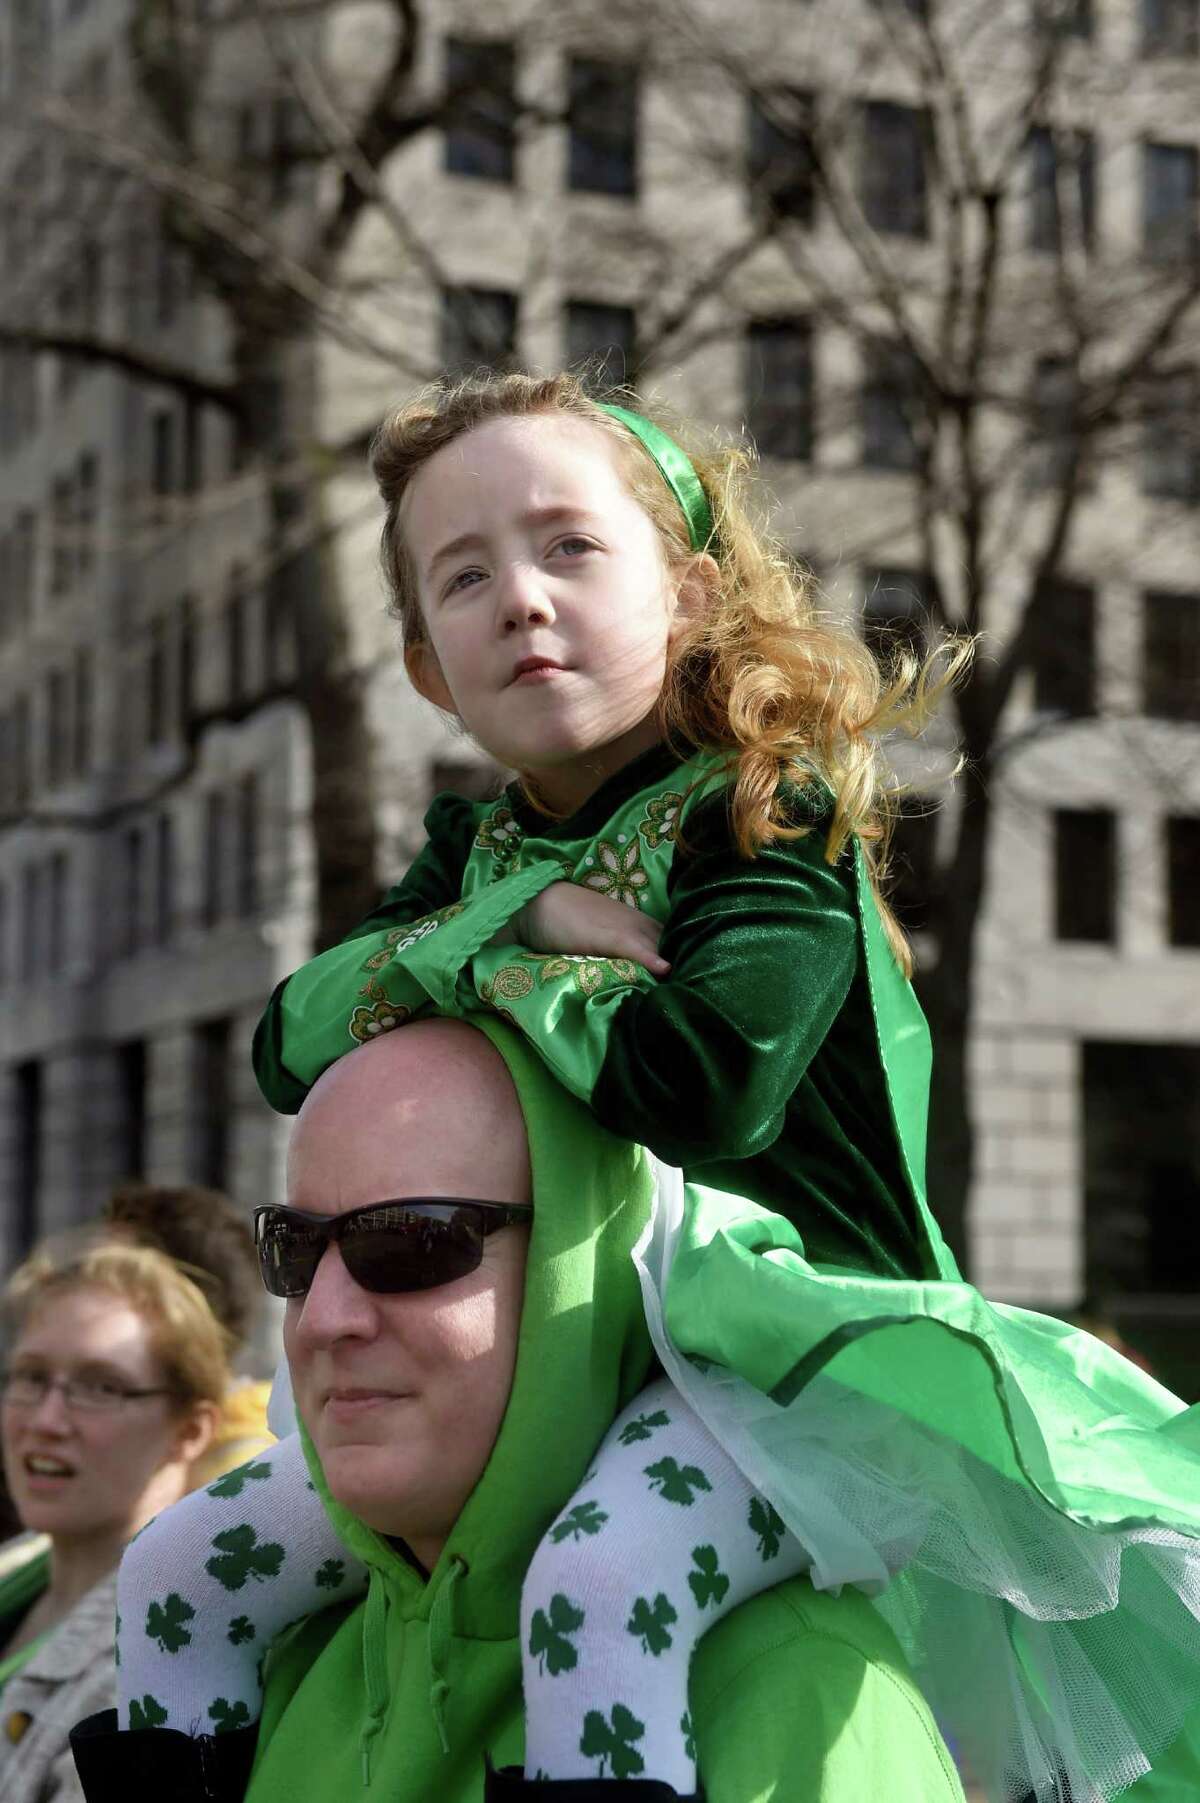 SEEN: 66th Annual Albany St. Patrick's Day Parade